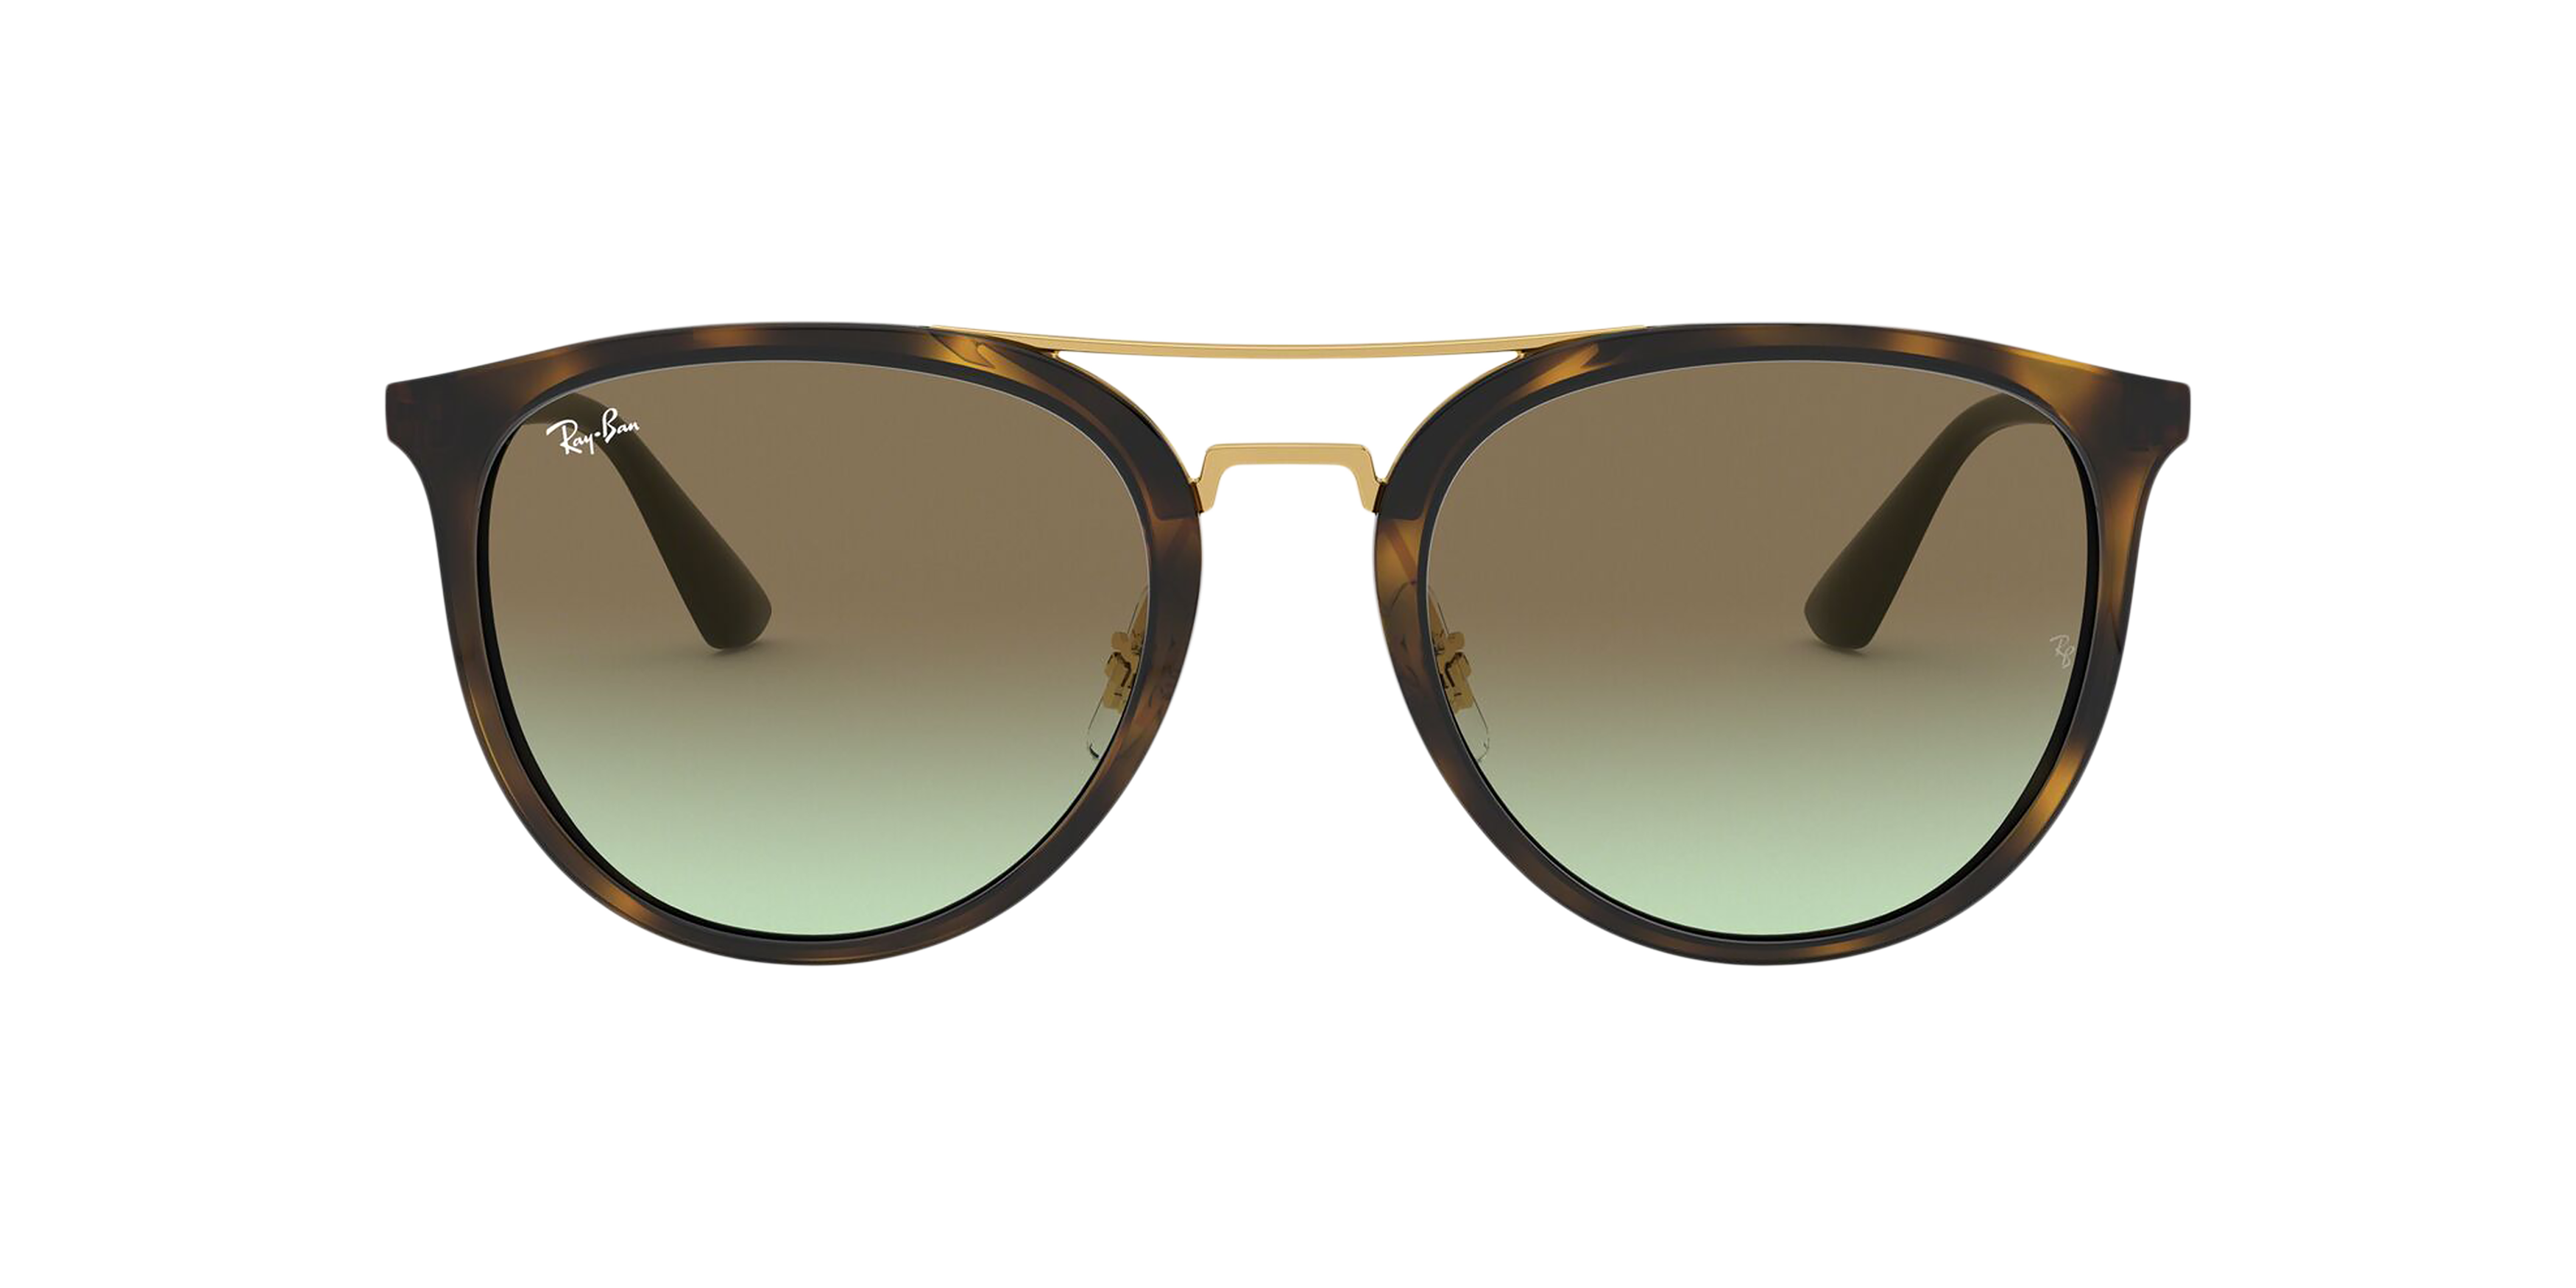 [products.image.front] Ray-Ban RB4285 6372E8